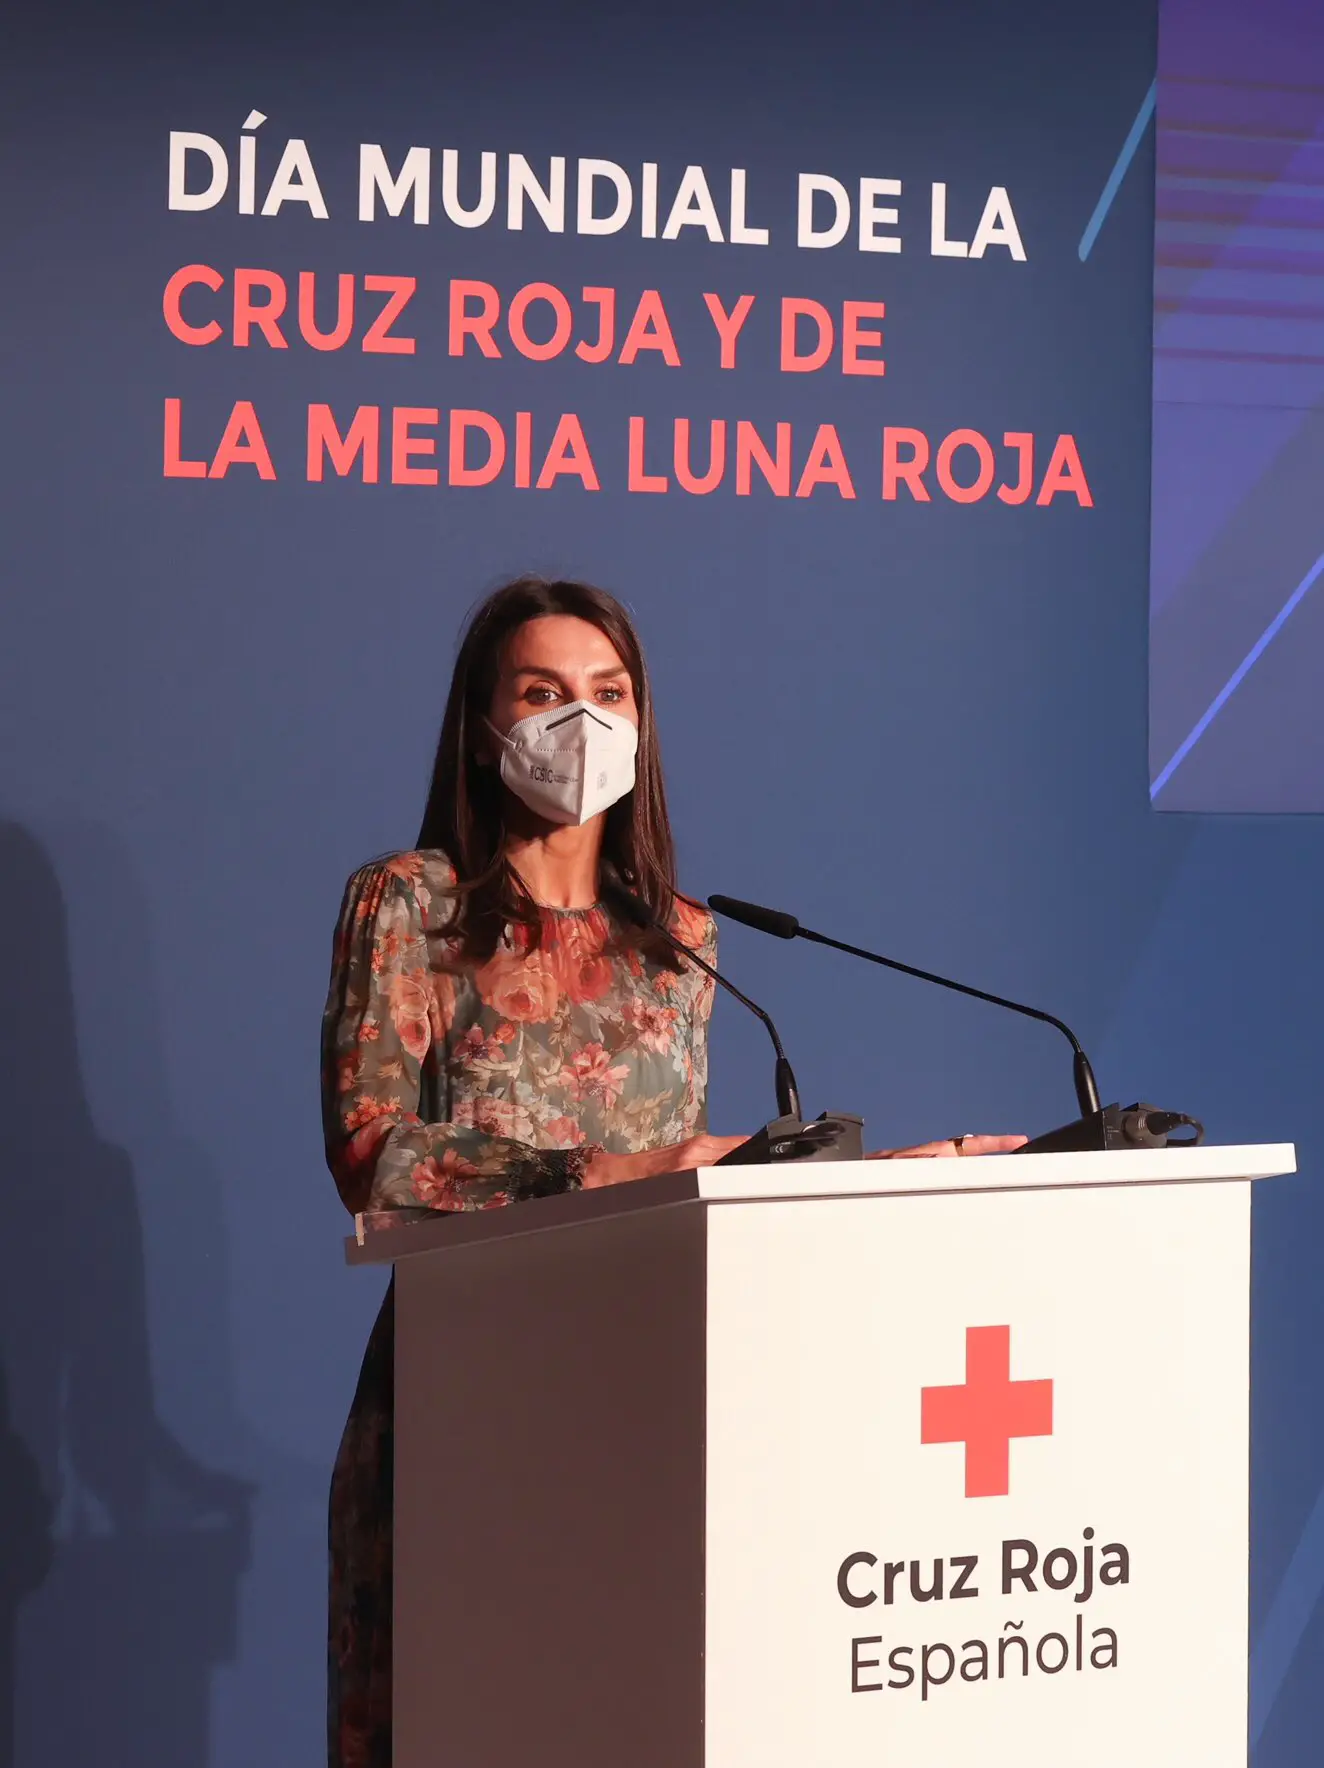 Queen Letizia addressed the guests at the Red Cross Day event